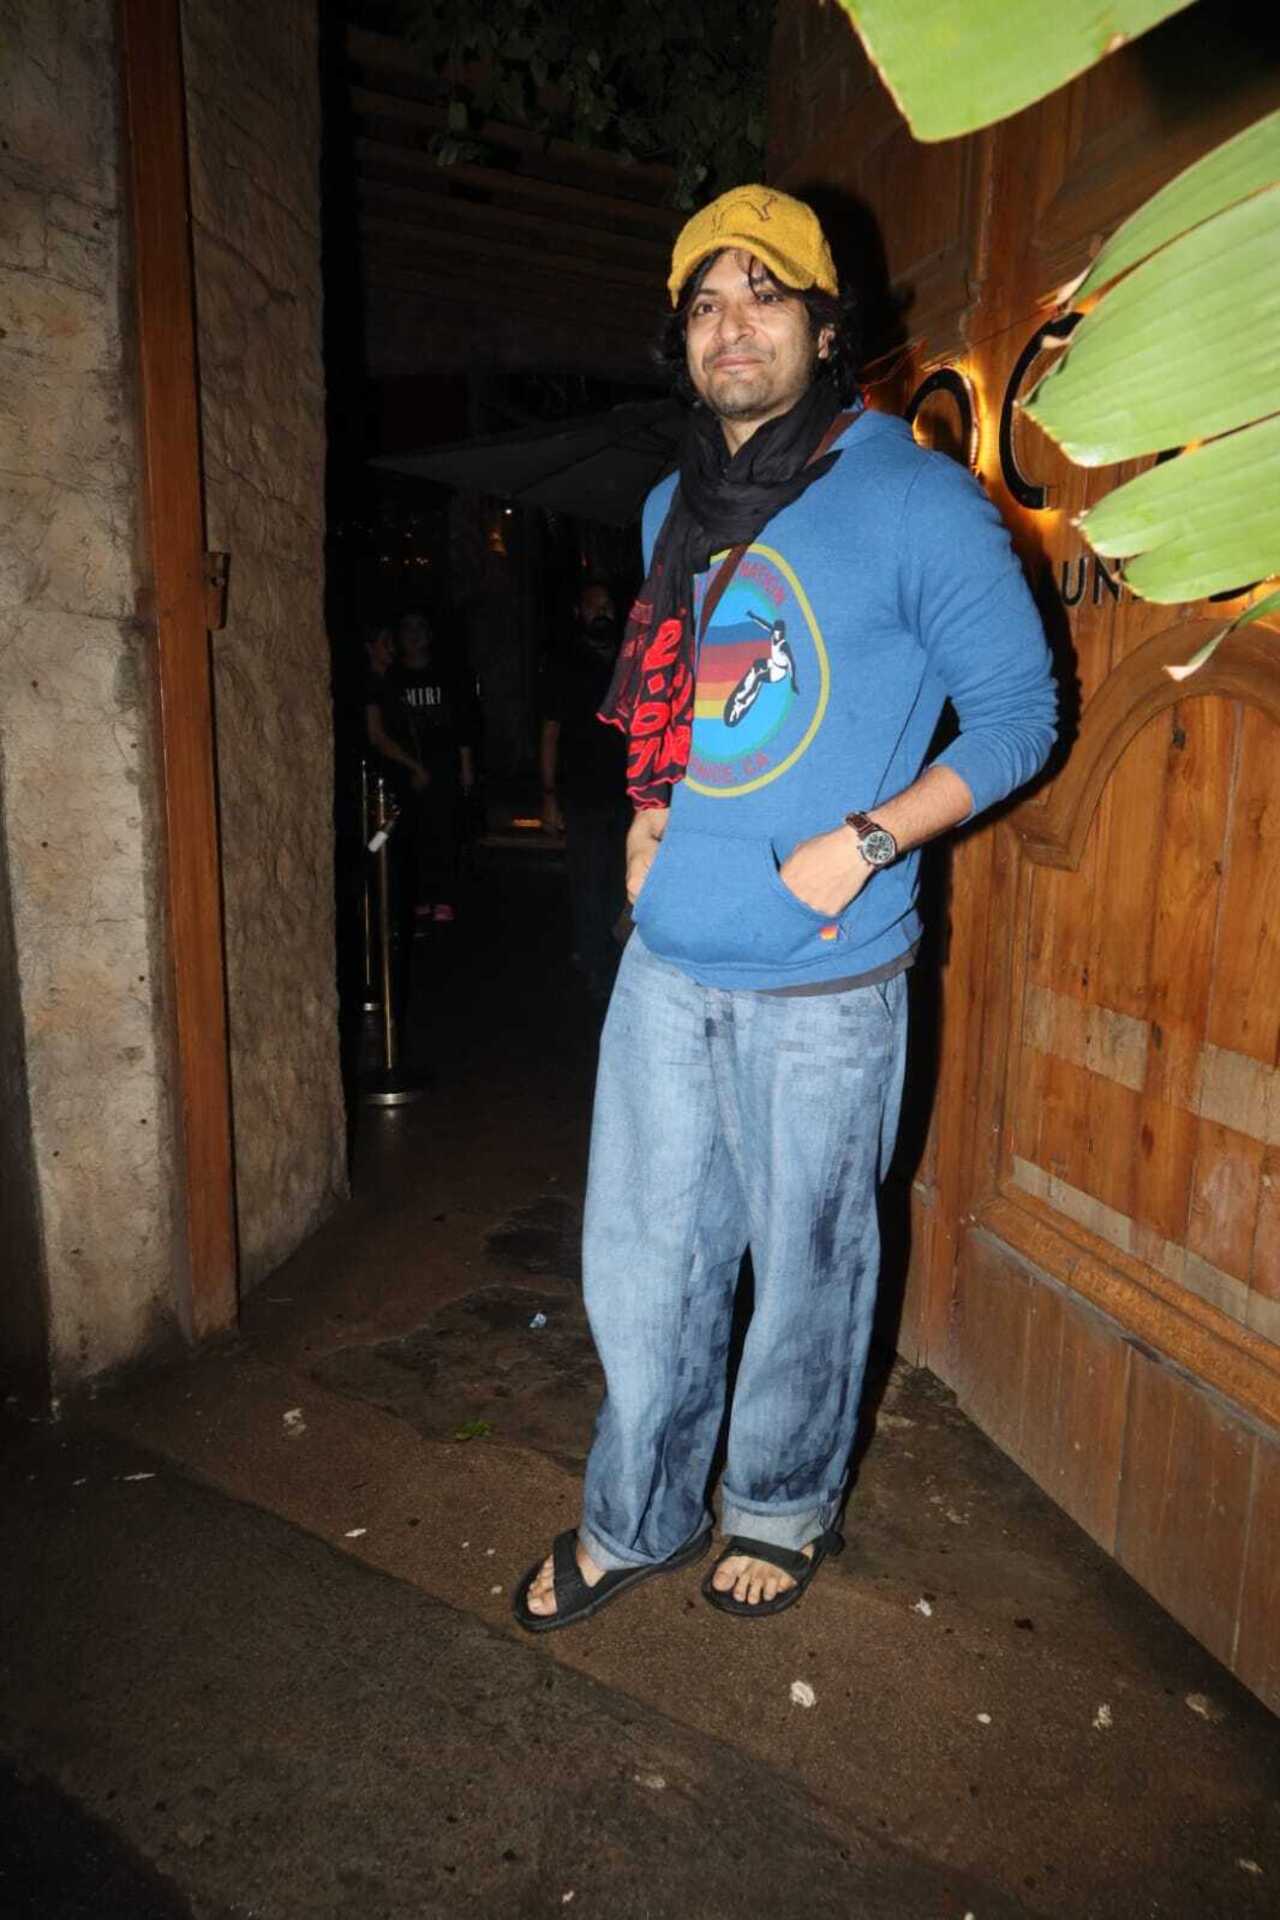 Mirzapur actor Ali Fazal also marked his attendance. The actor was seen wearing a casual outfit 